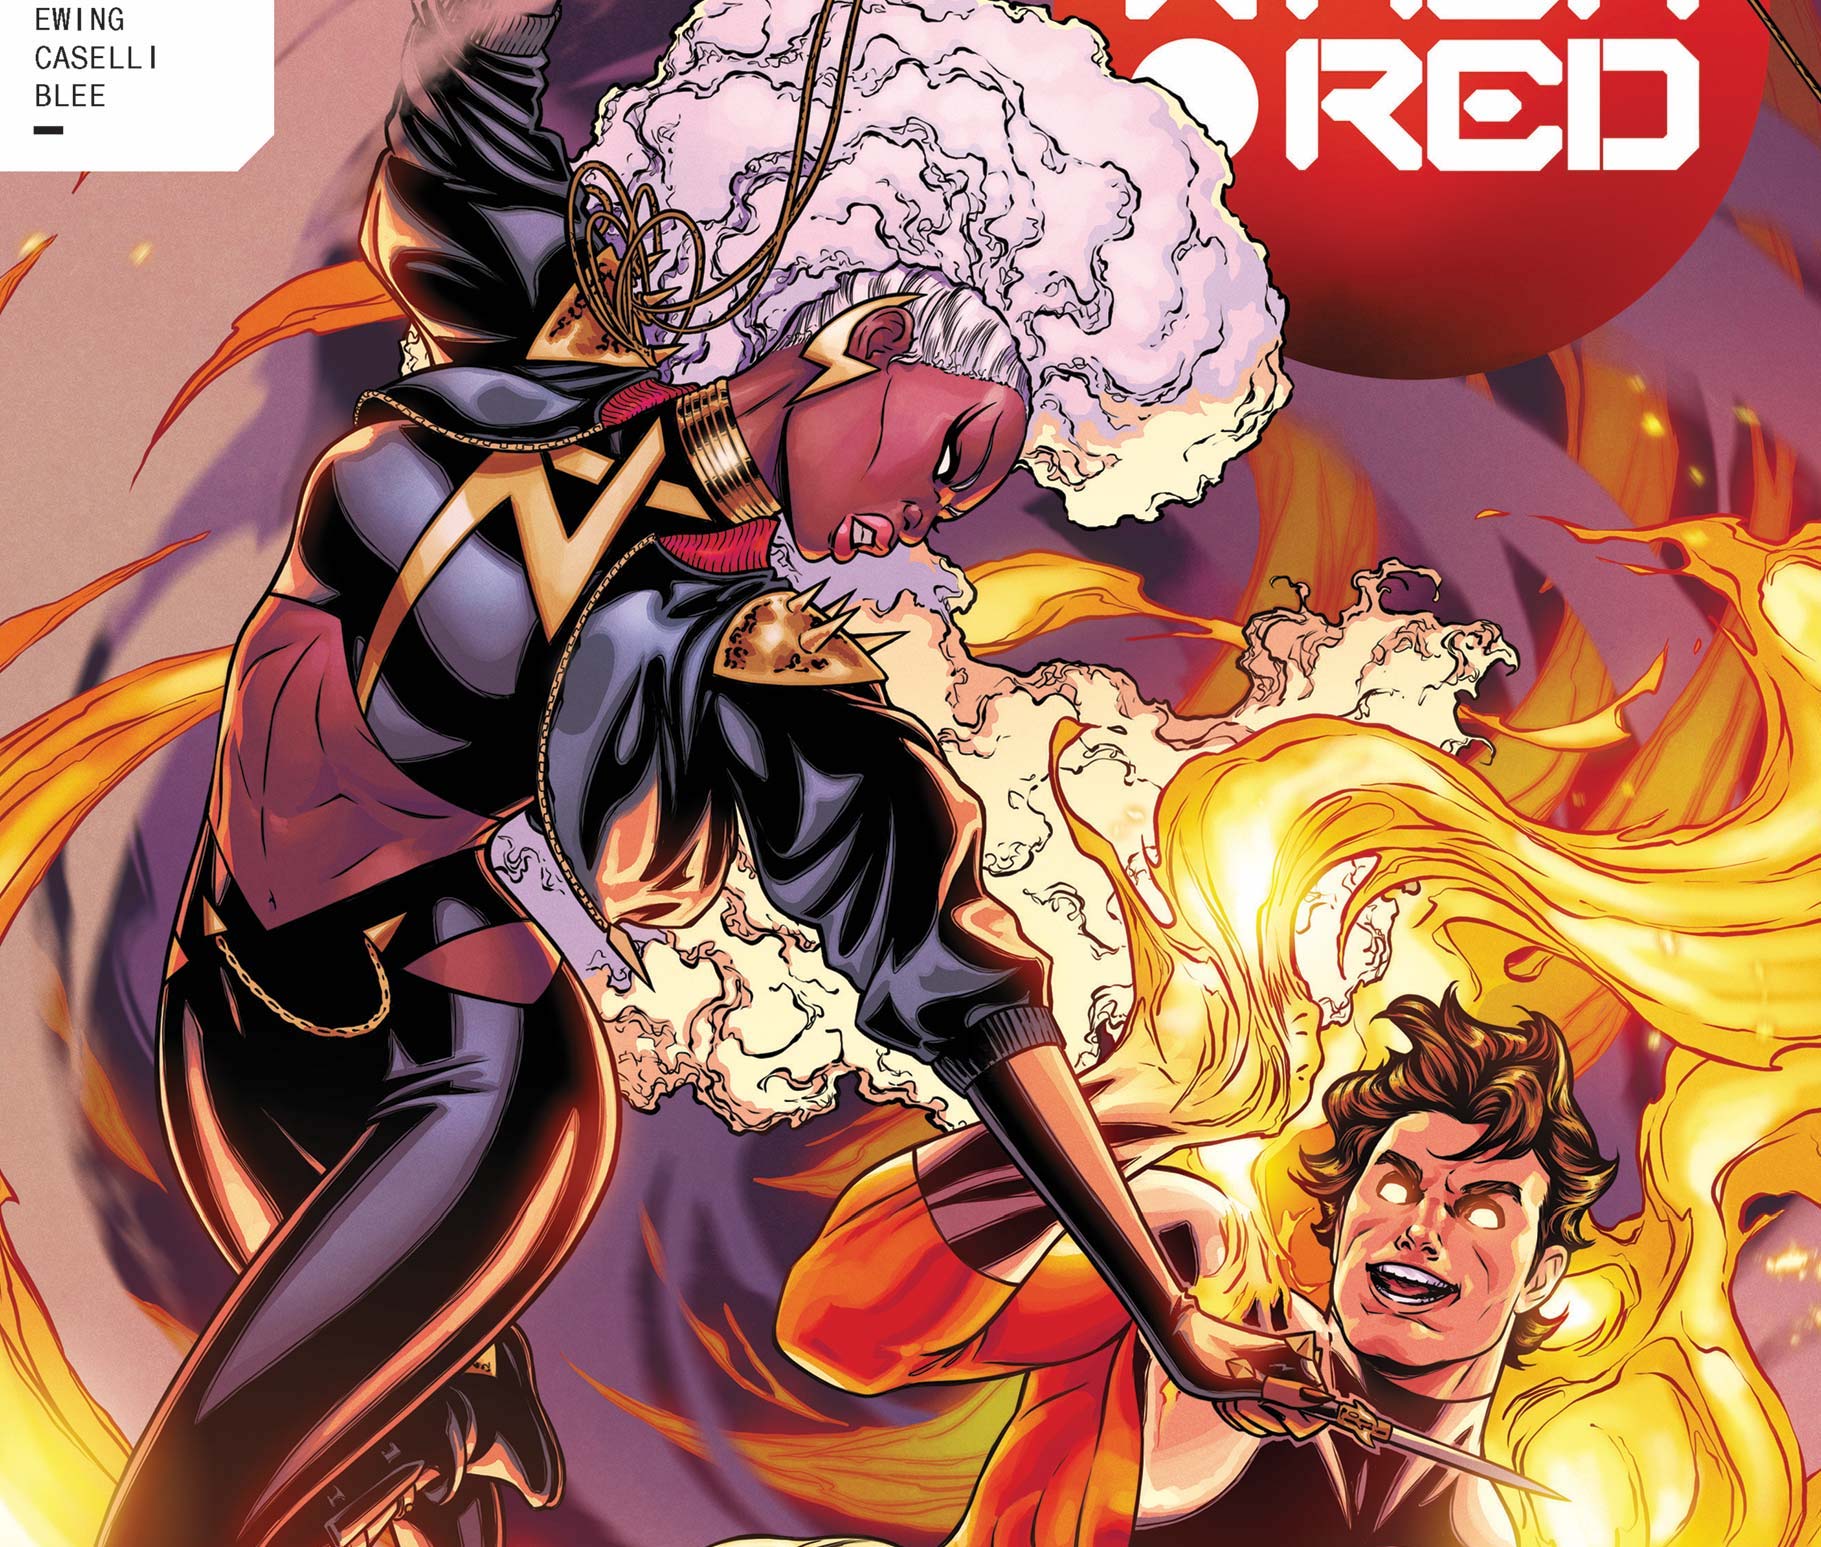 'X-Men Red' #2 continues the series' nuanced character work